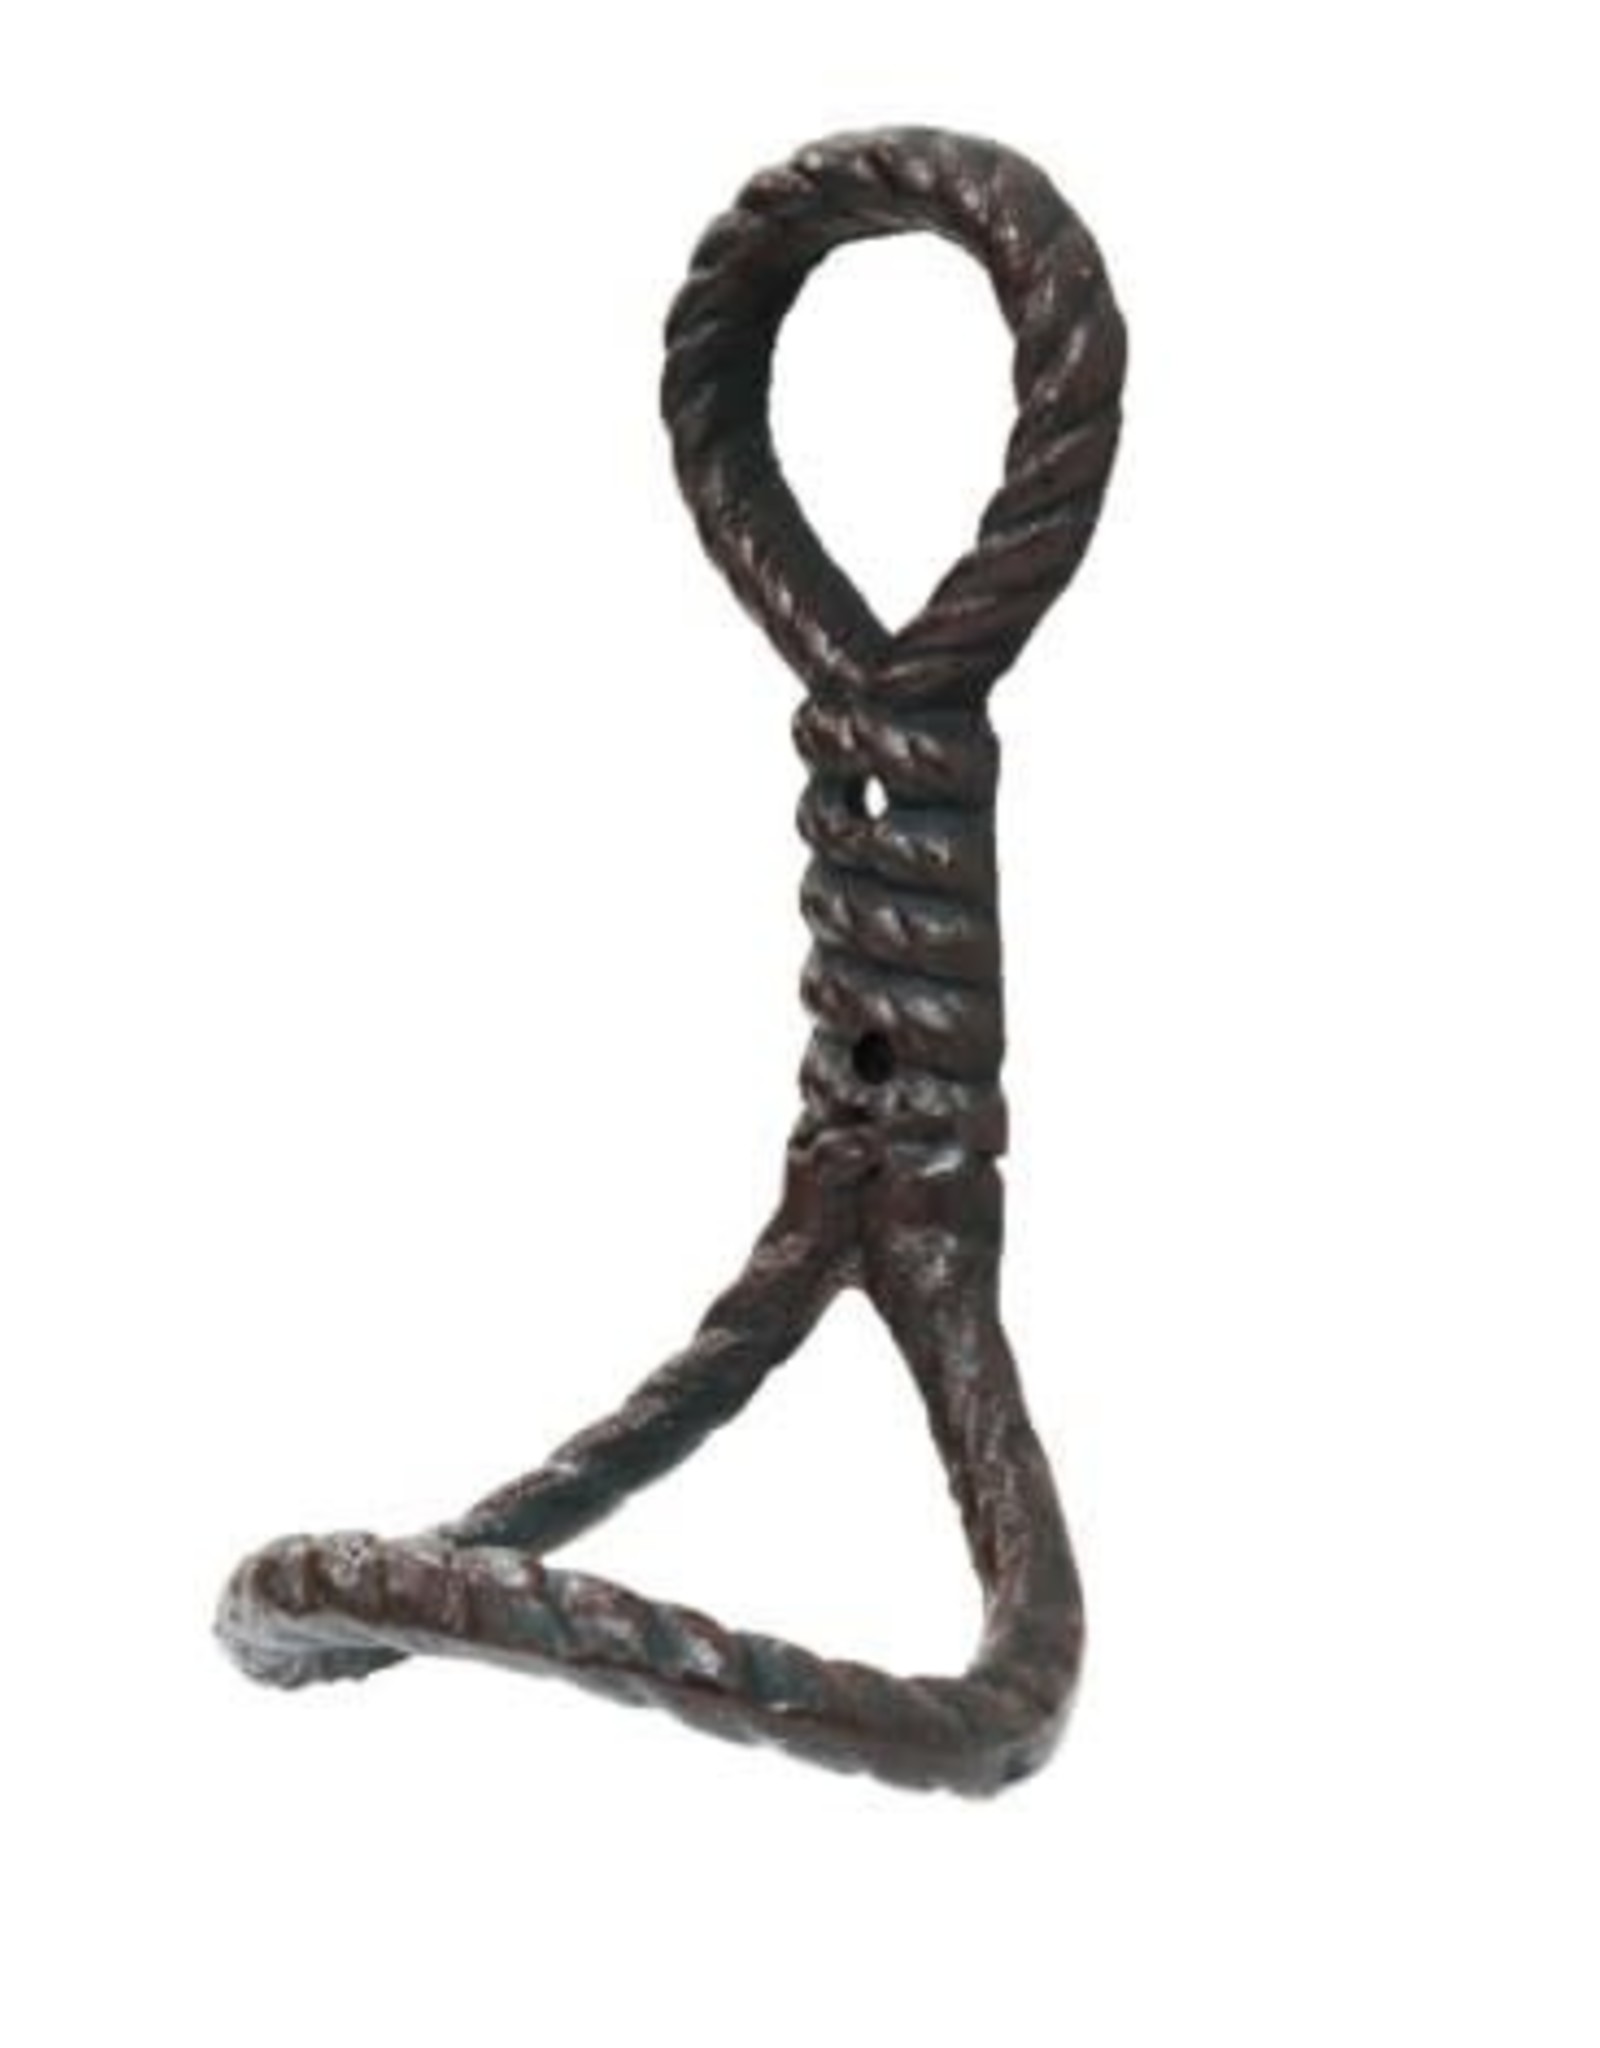 Small Knotted Rope Hook 4.5"